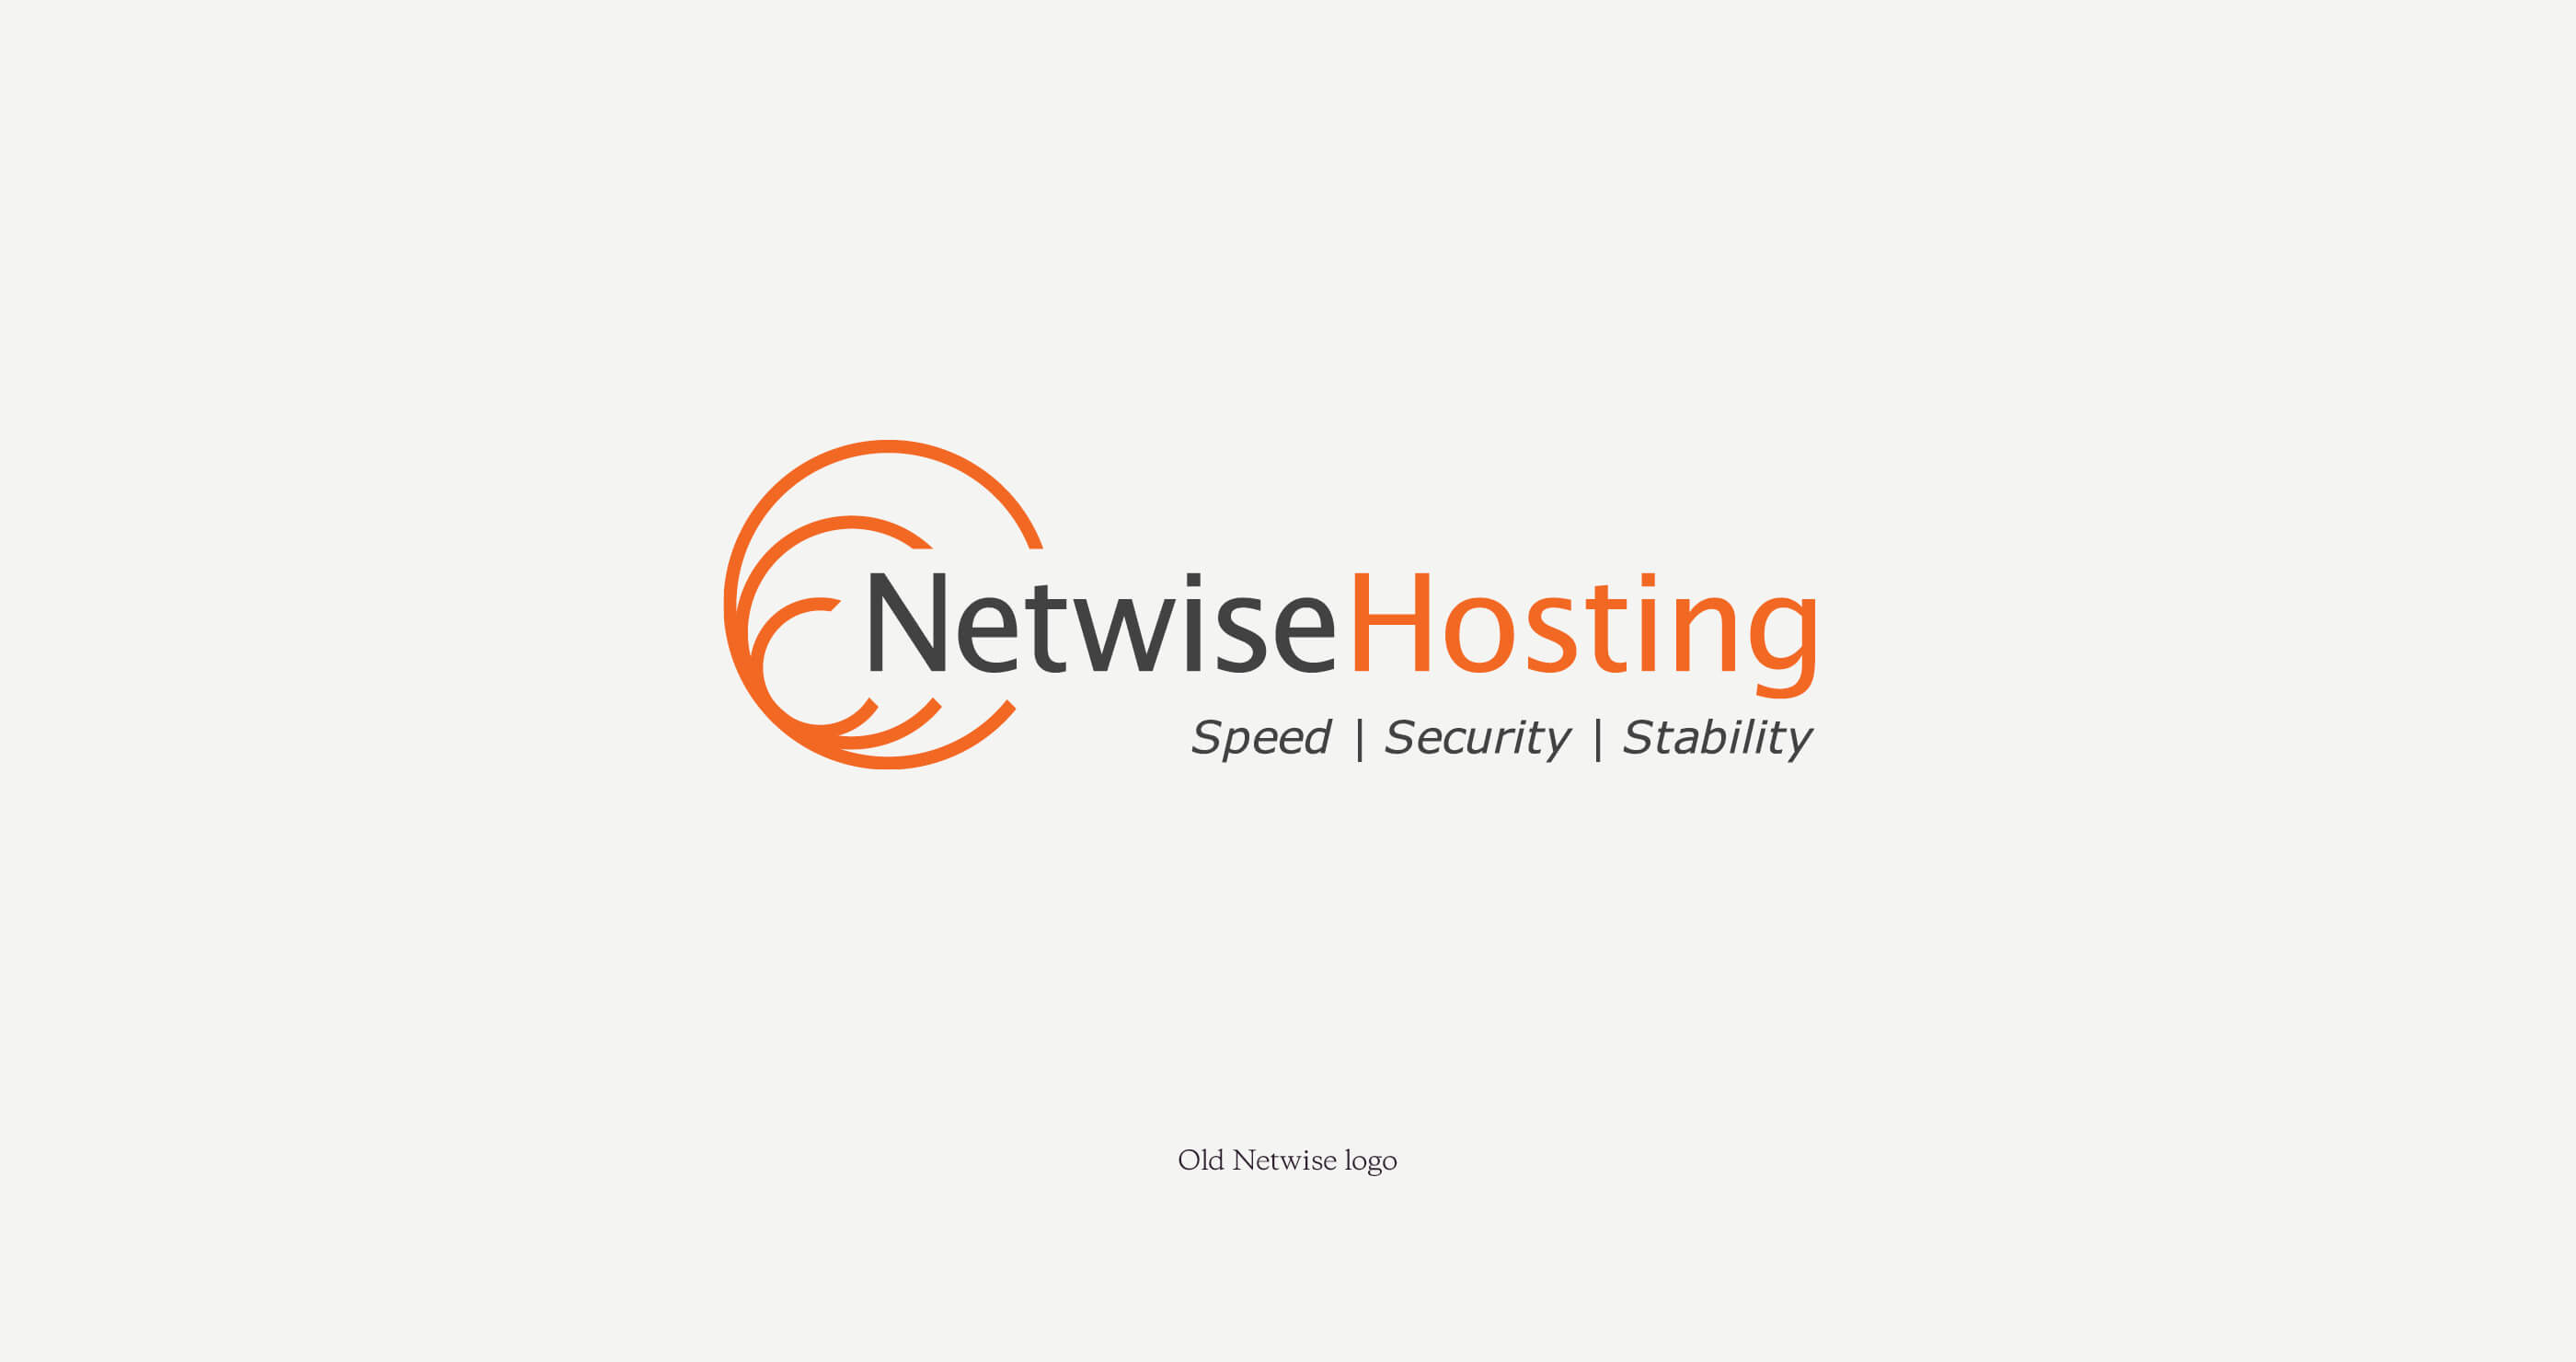 Old Netwise Hosting logo. Grey and orange text pretruding from three orange circles.